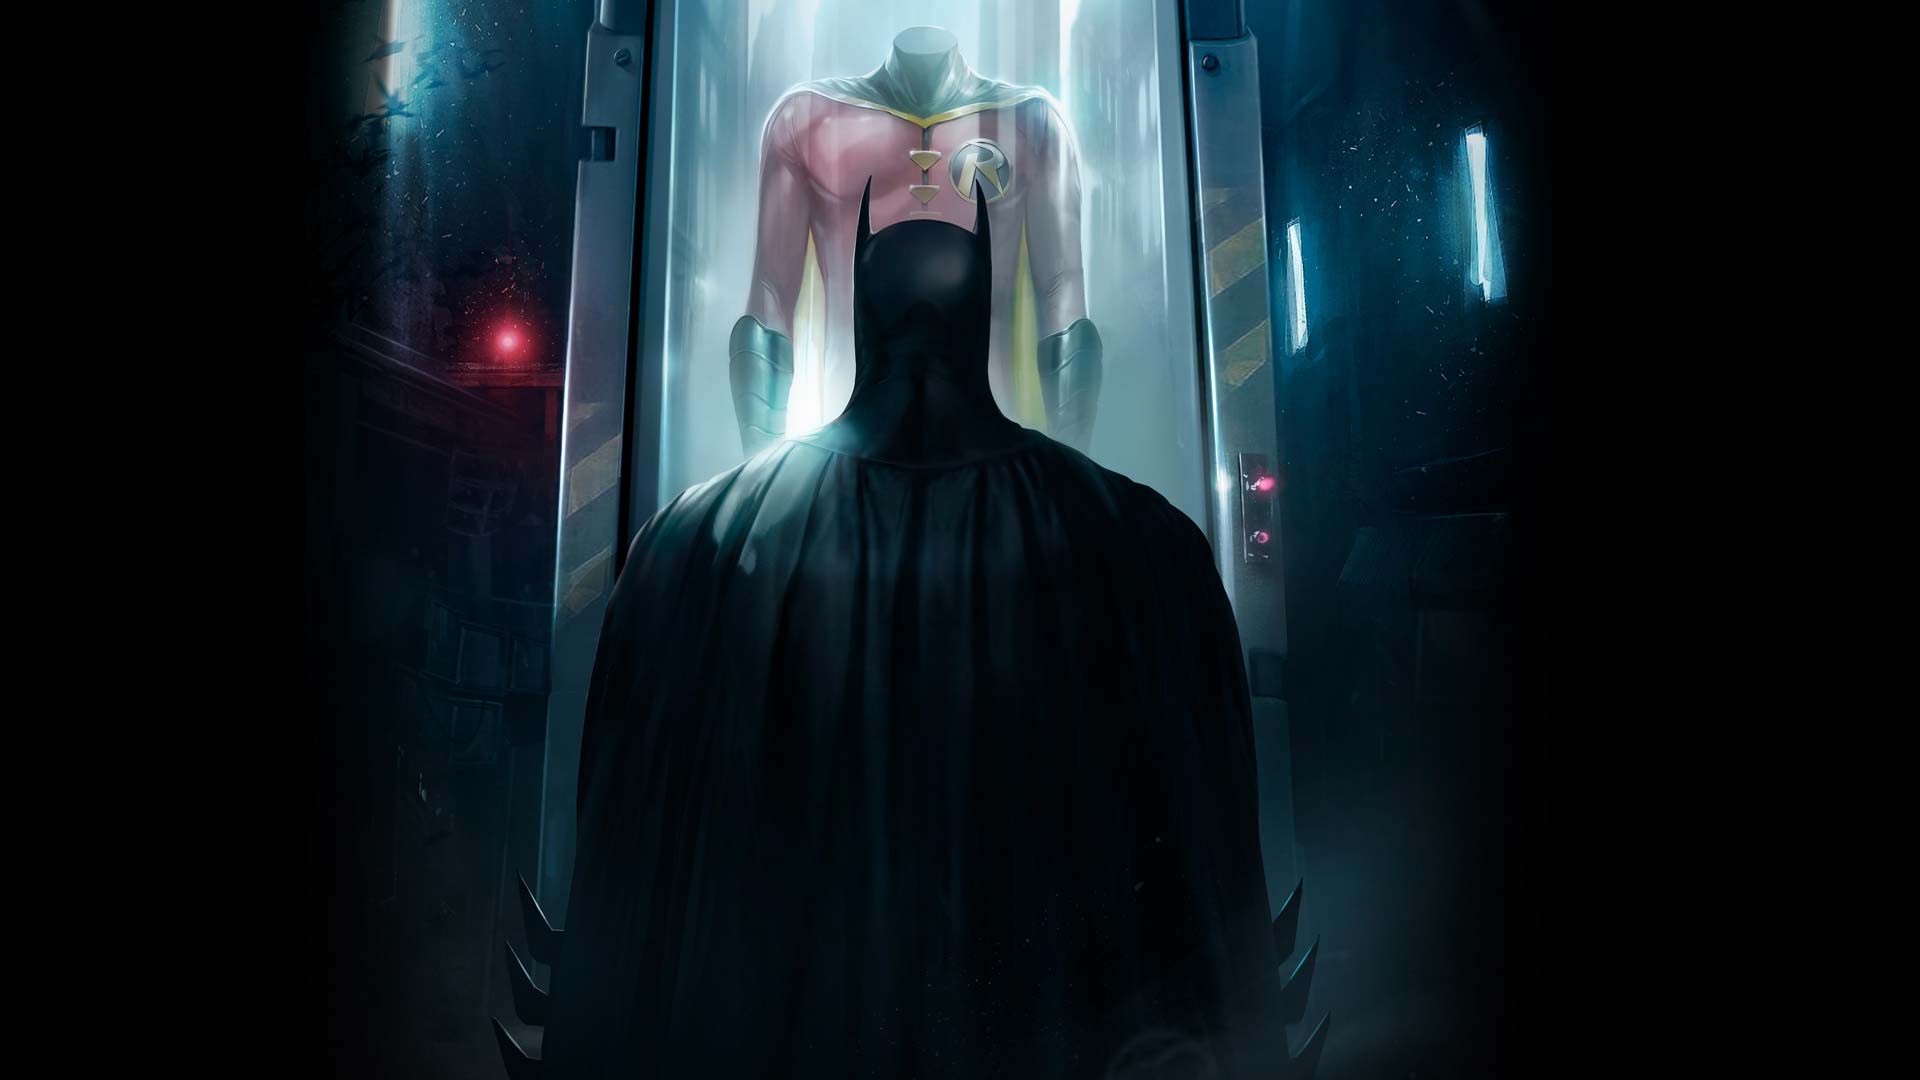 Movie Batman: Death In The Family HD Wallpaper | Background Image